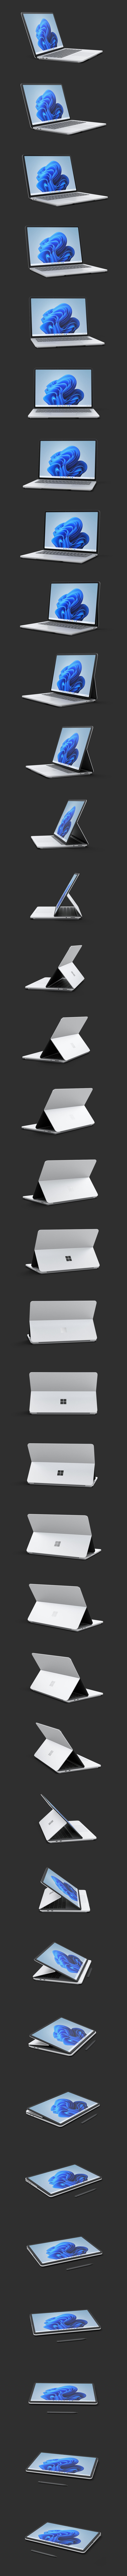 A 360 degree rotation of Surface Laptop Studio.